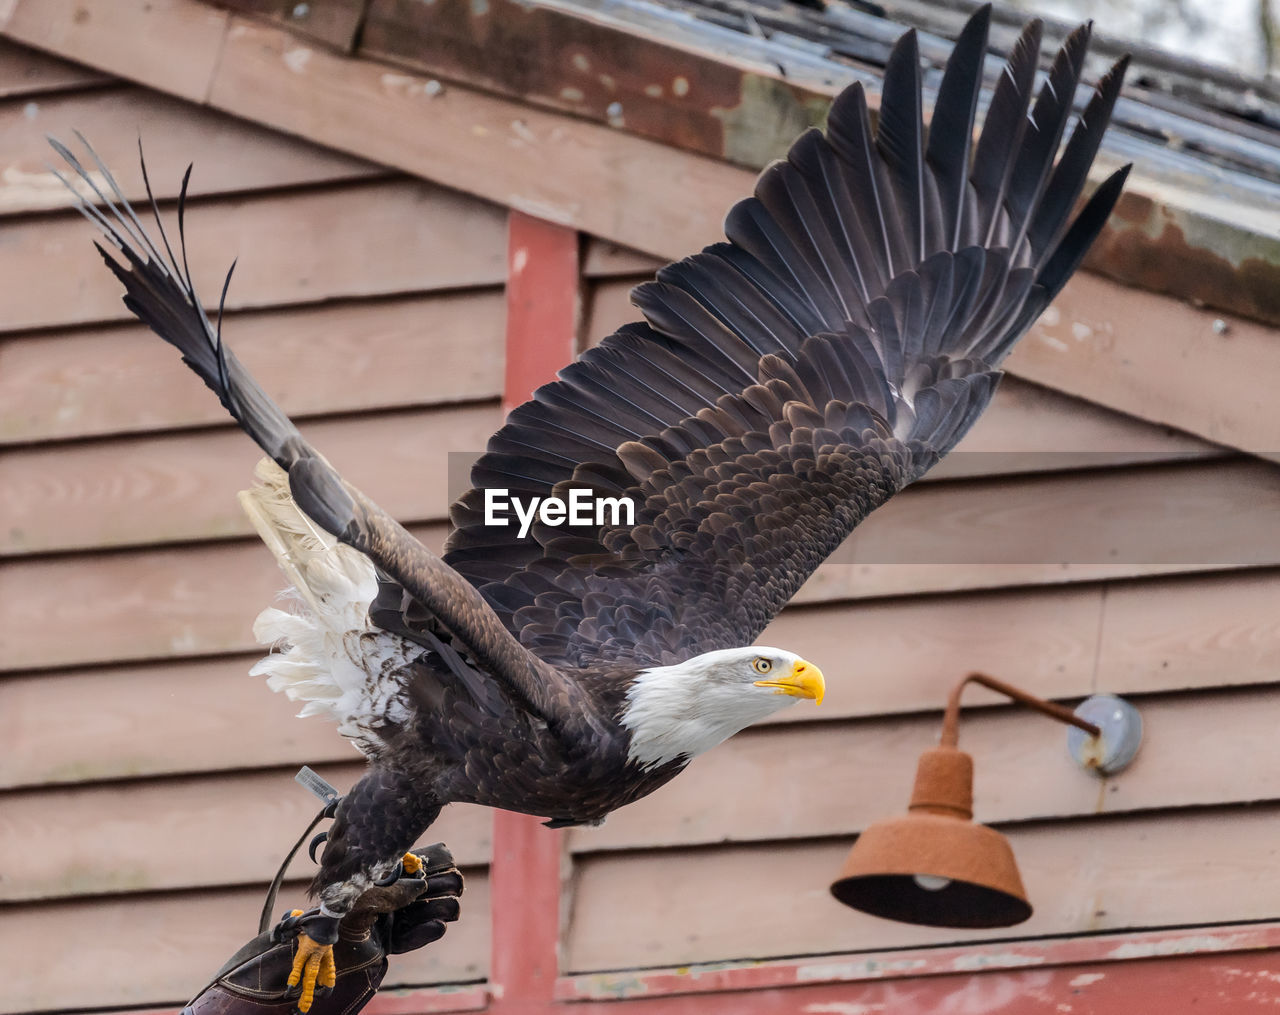 Bald eagle, scientific name haliaeetus leucocephalus , departing from the hand of the falconer 